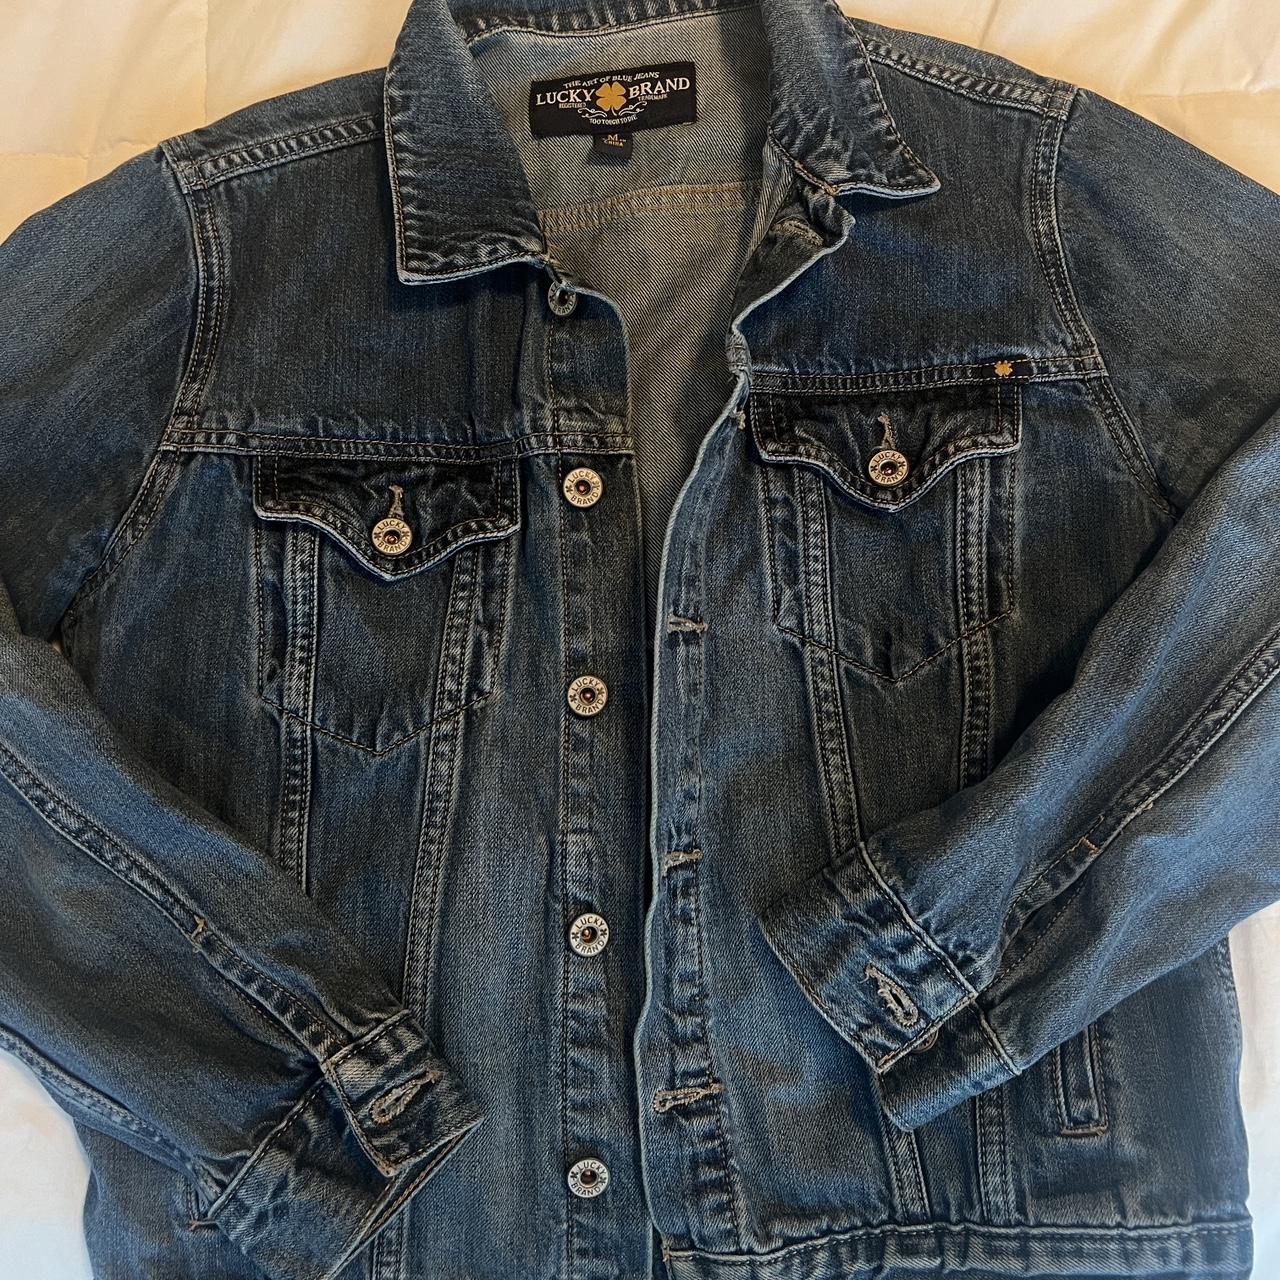 LUCKY BRAND DENIM JACKET - Good condition - Soft and - Depop